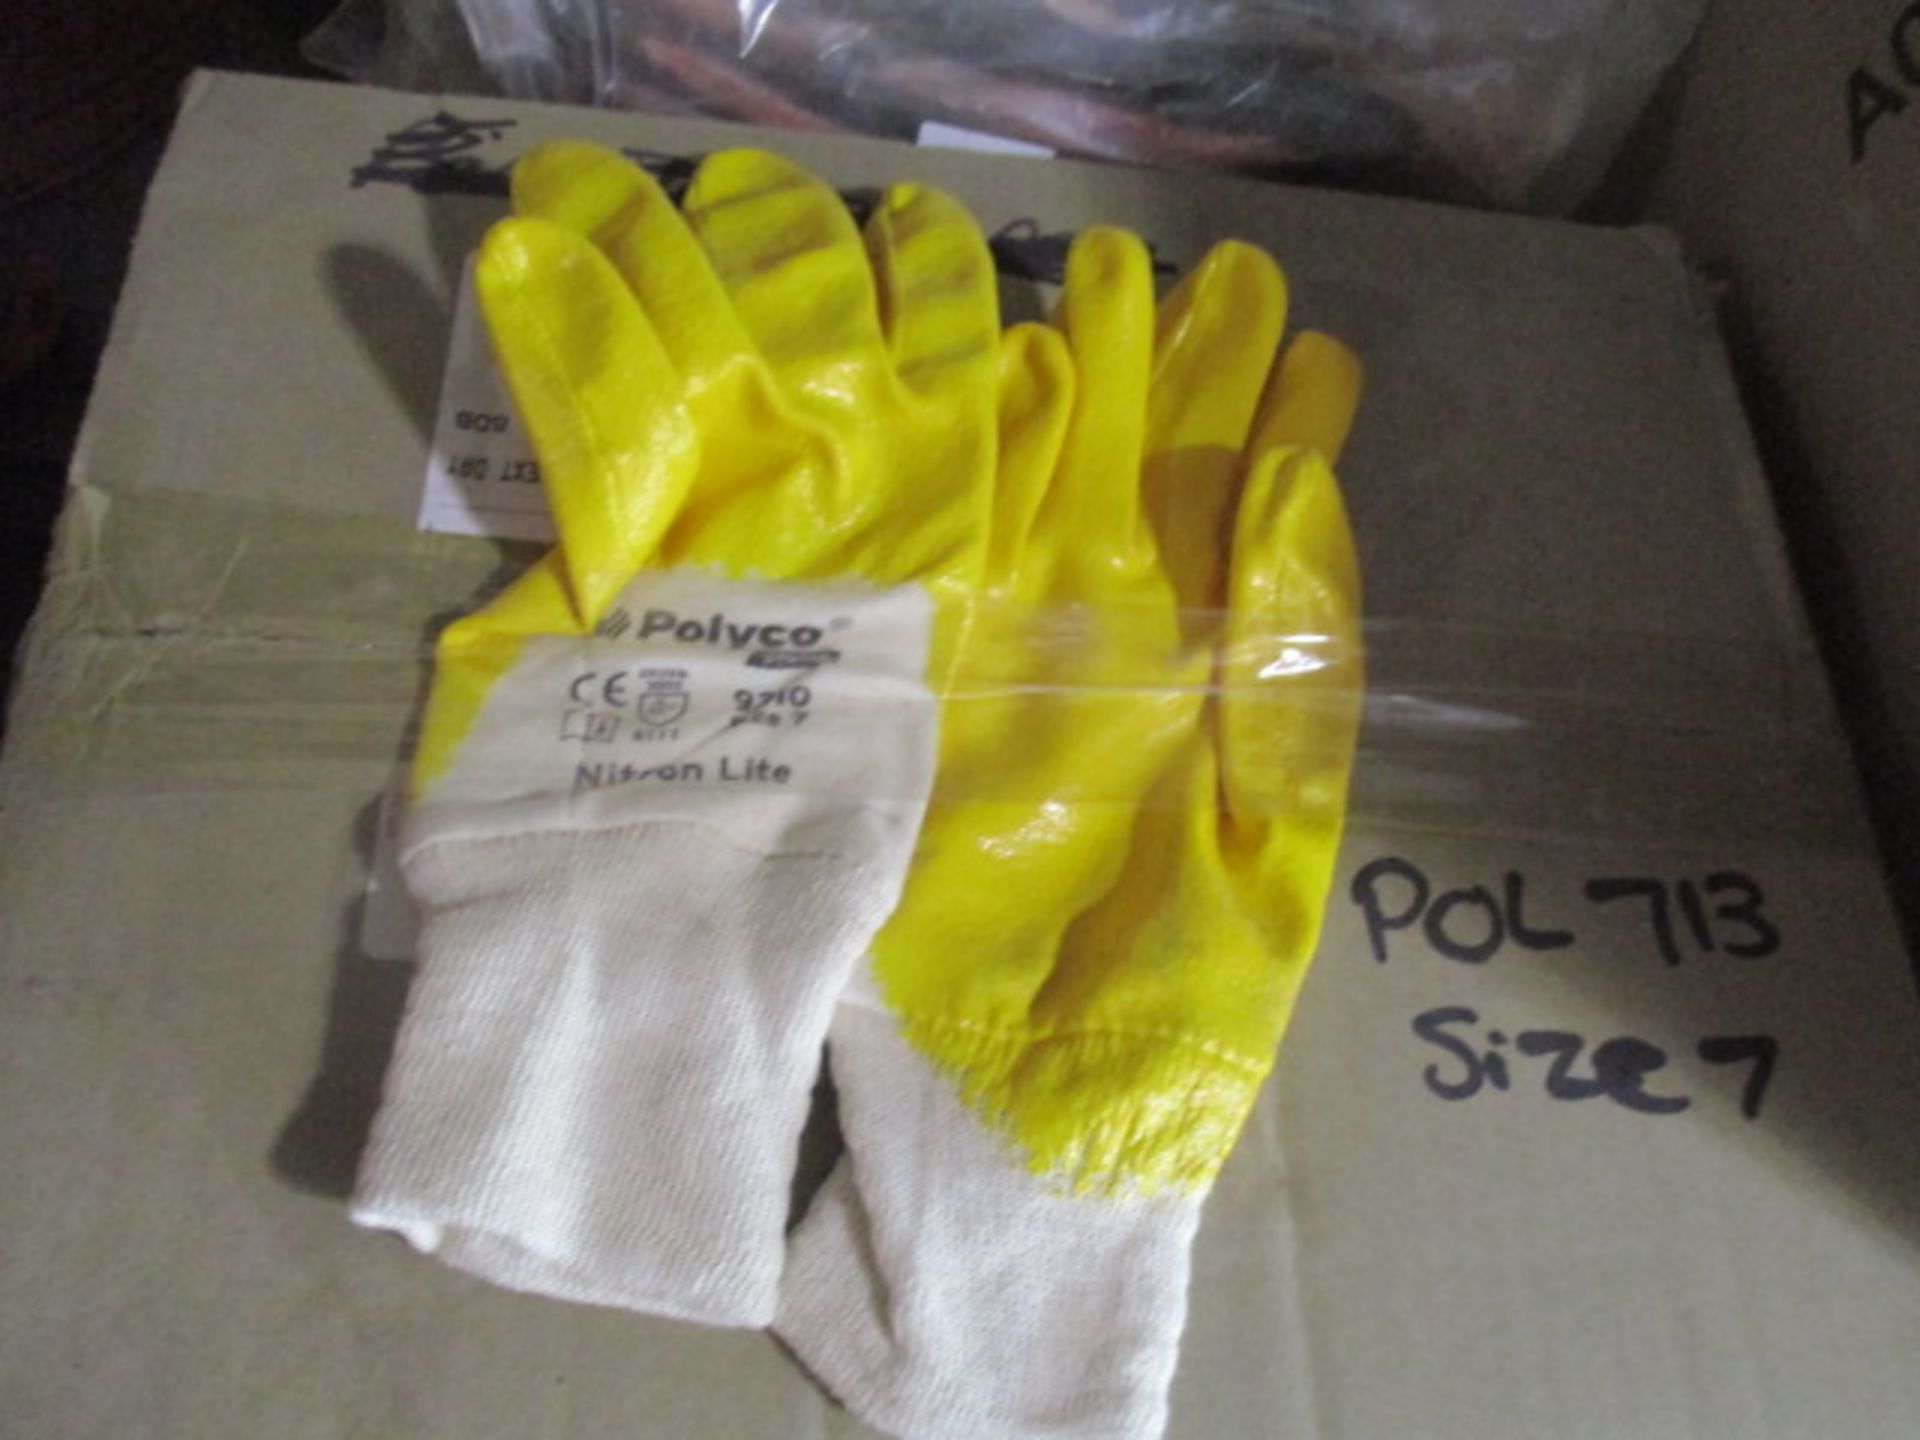 Appx 48 pairs Polyco Rubberized gloves - new and selaed